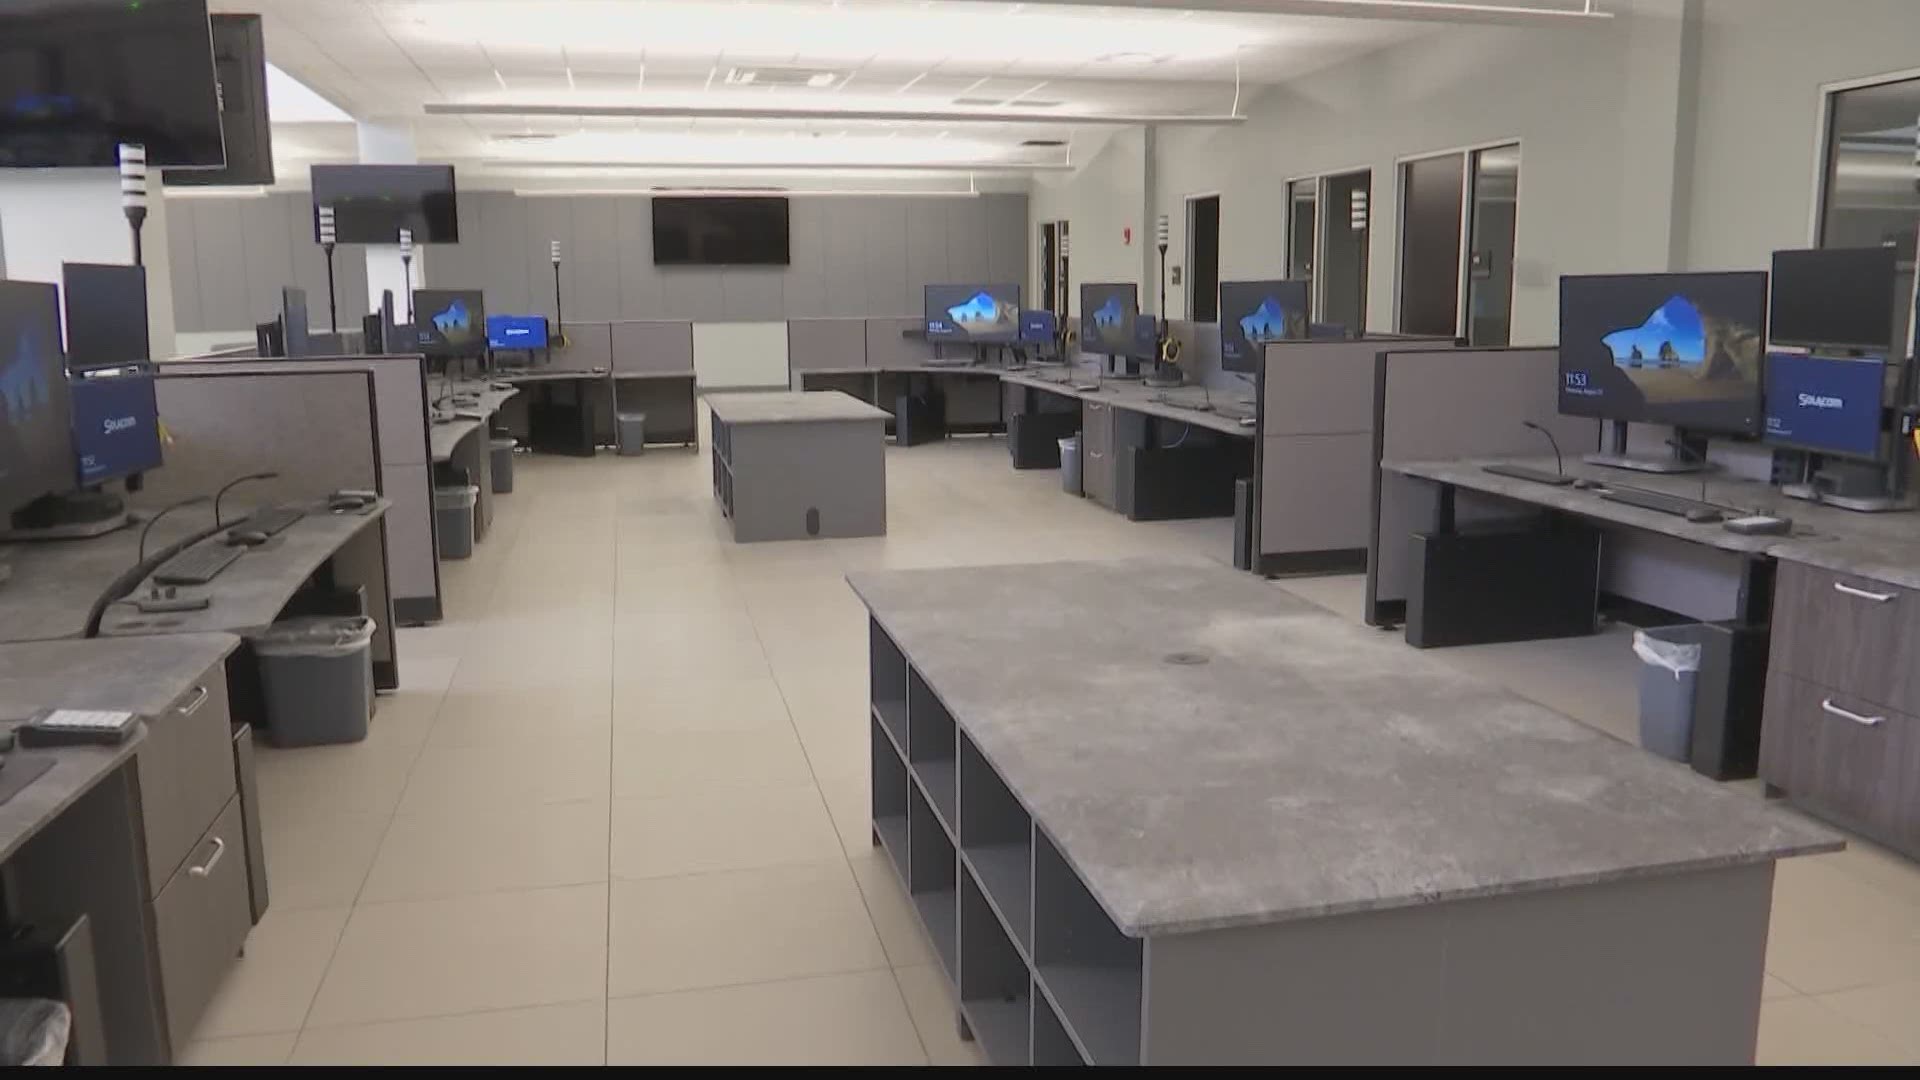 In about a month, 911 operators will be able to move into their new facility in Huntsville/Madison County.